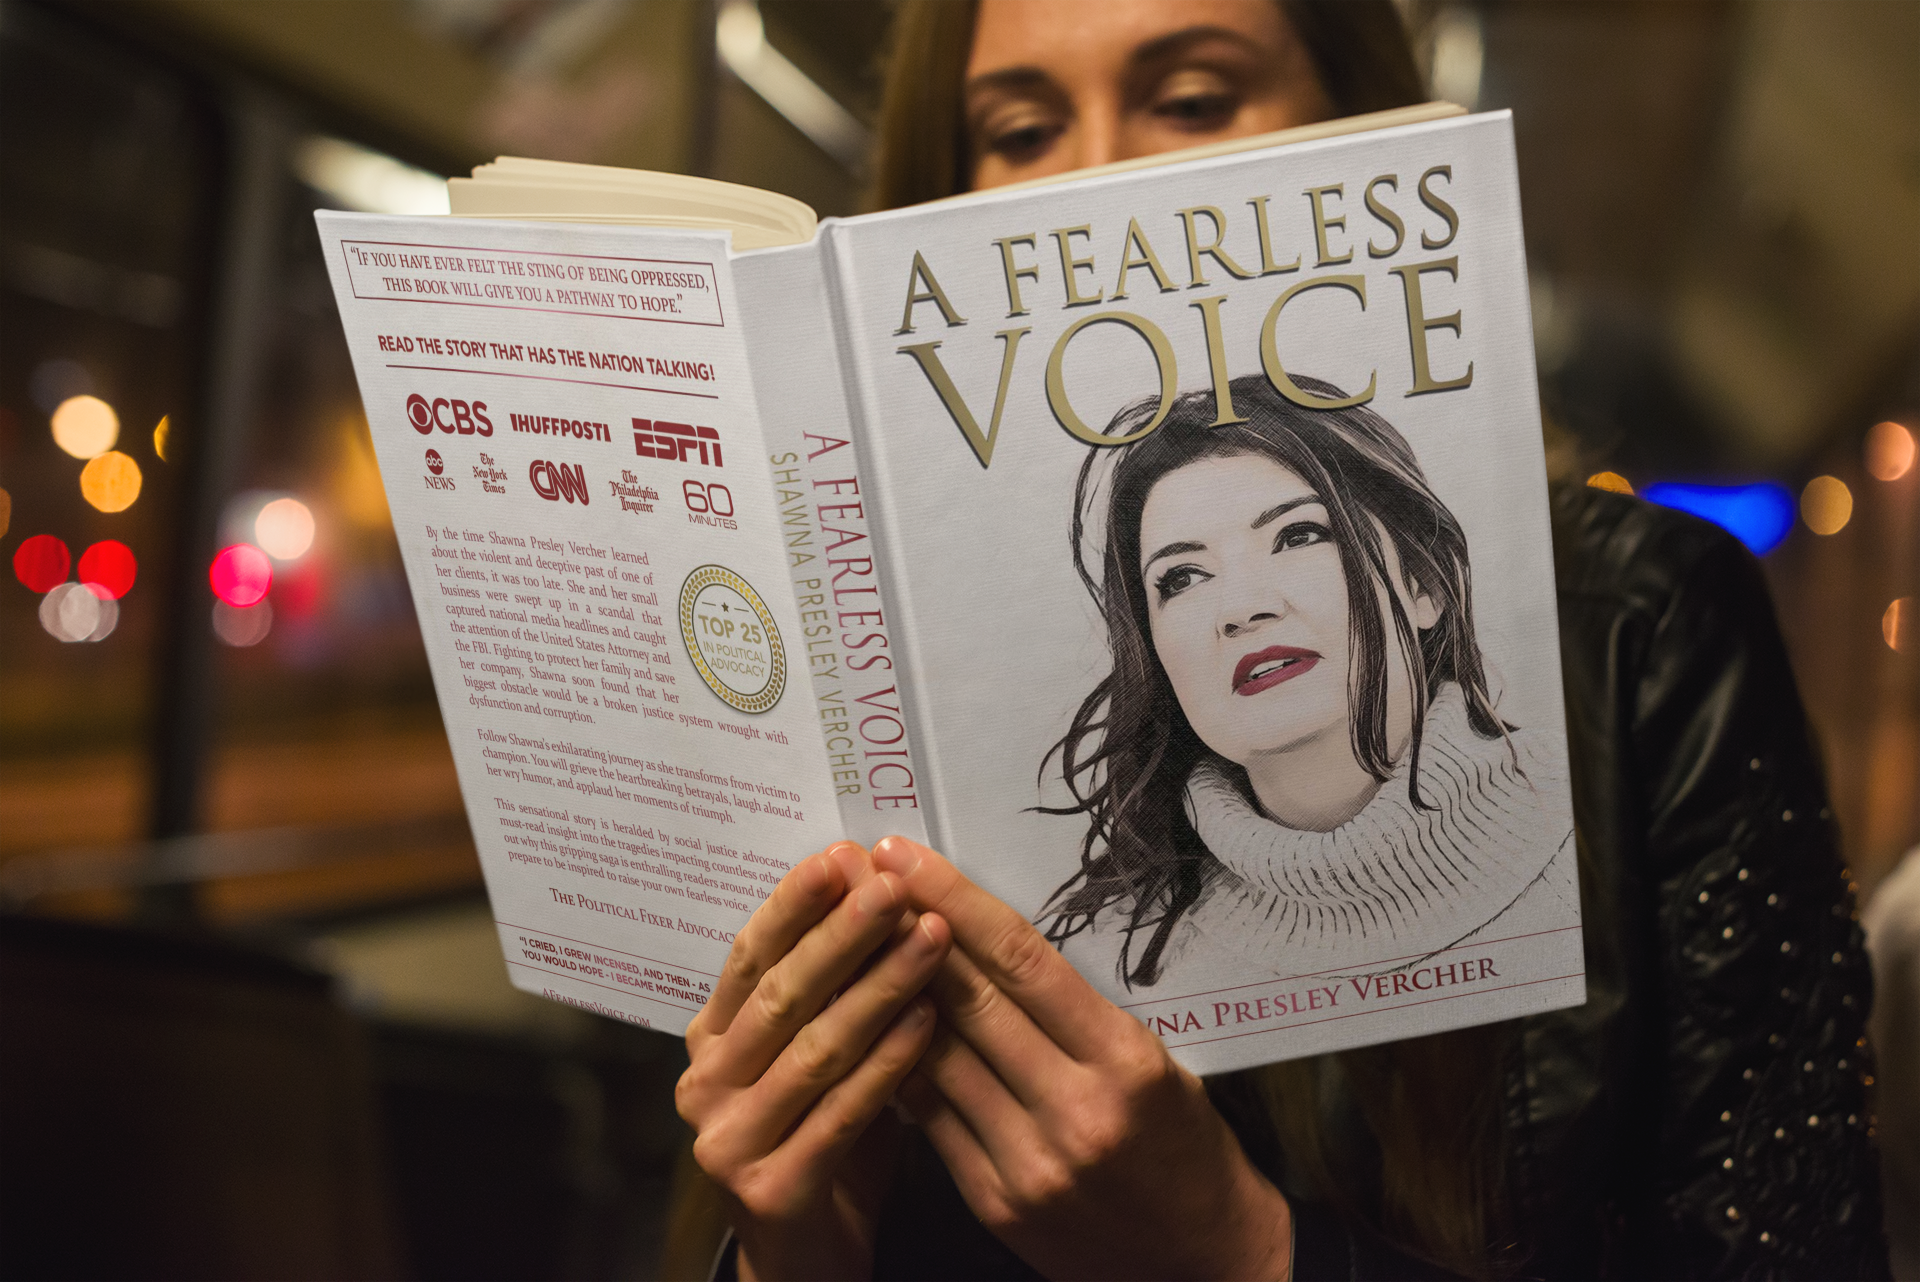 A Fearless Voice - the chart-topping book by Shawna Presley Vercher